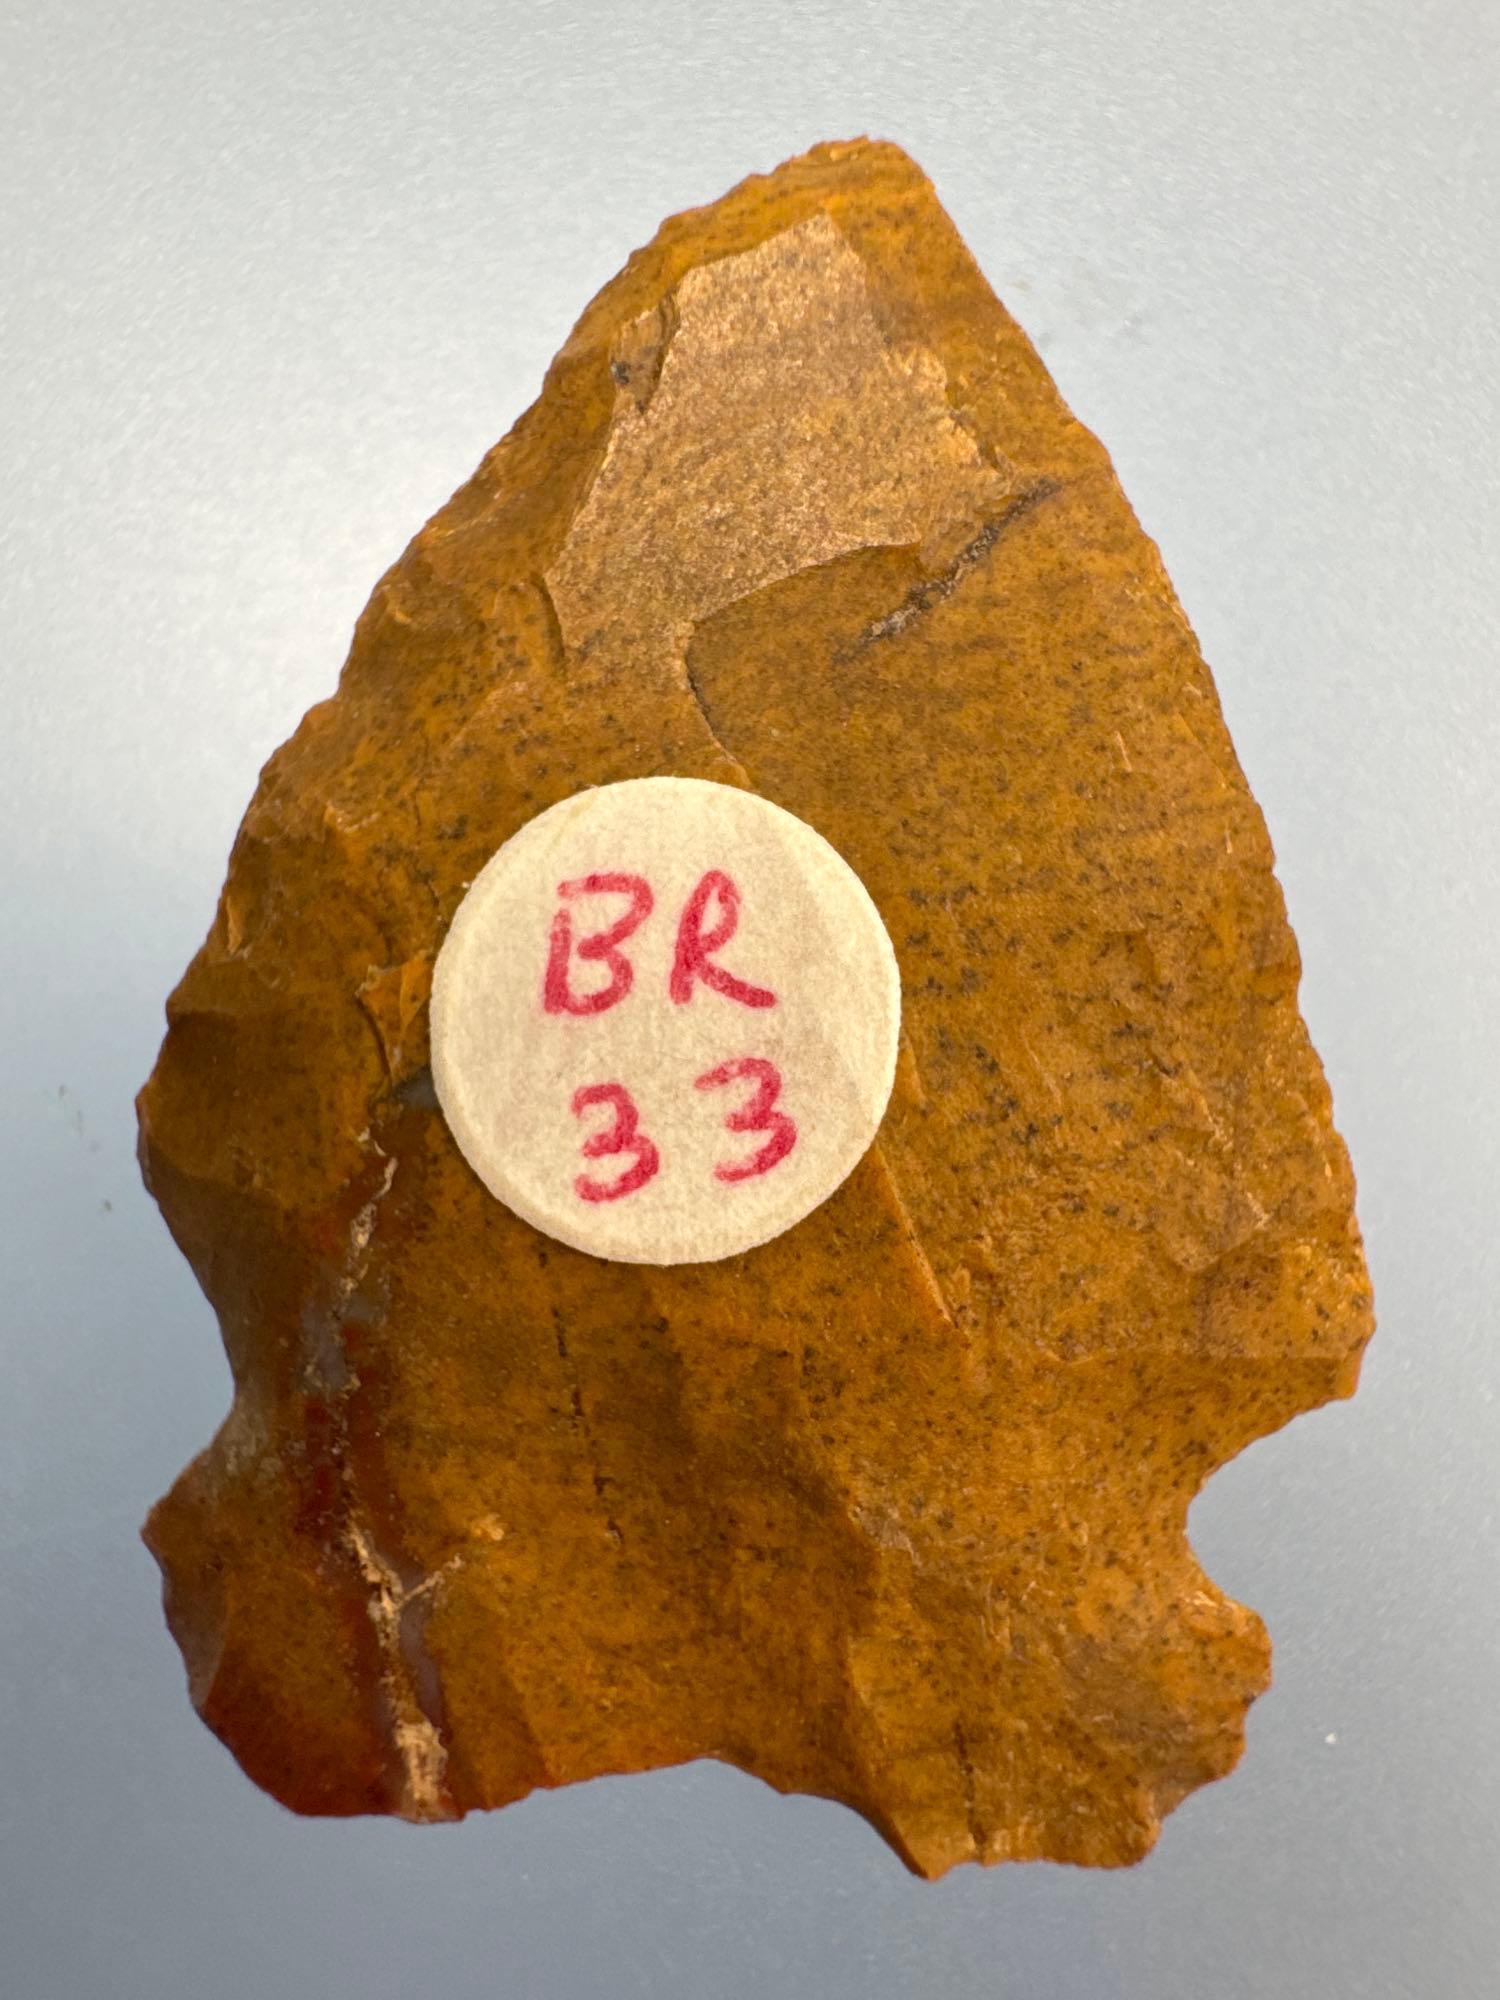 1 1/4" Jasper Bifurcate, Well-Made, Found in New Jersey, Ex: Bud Ripley Collection